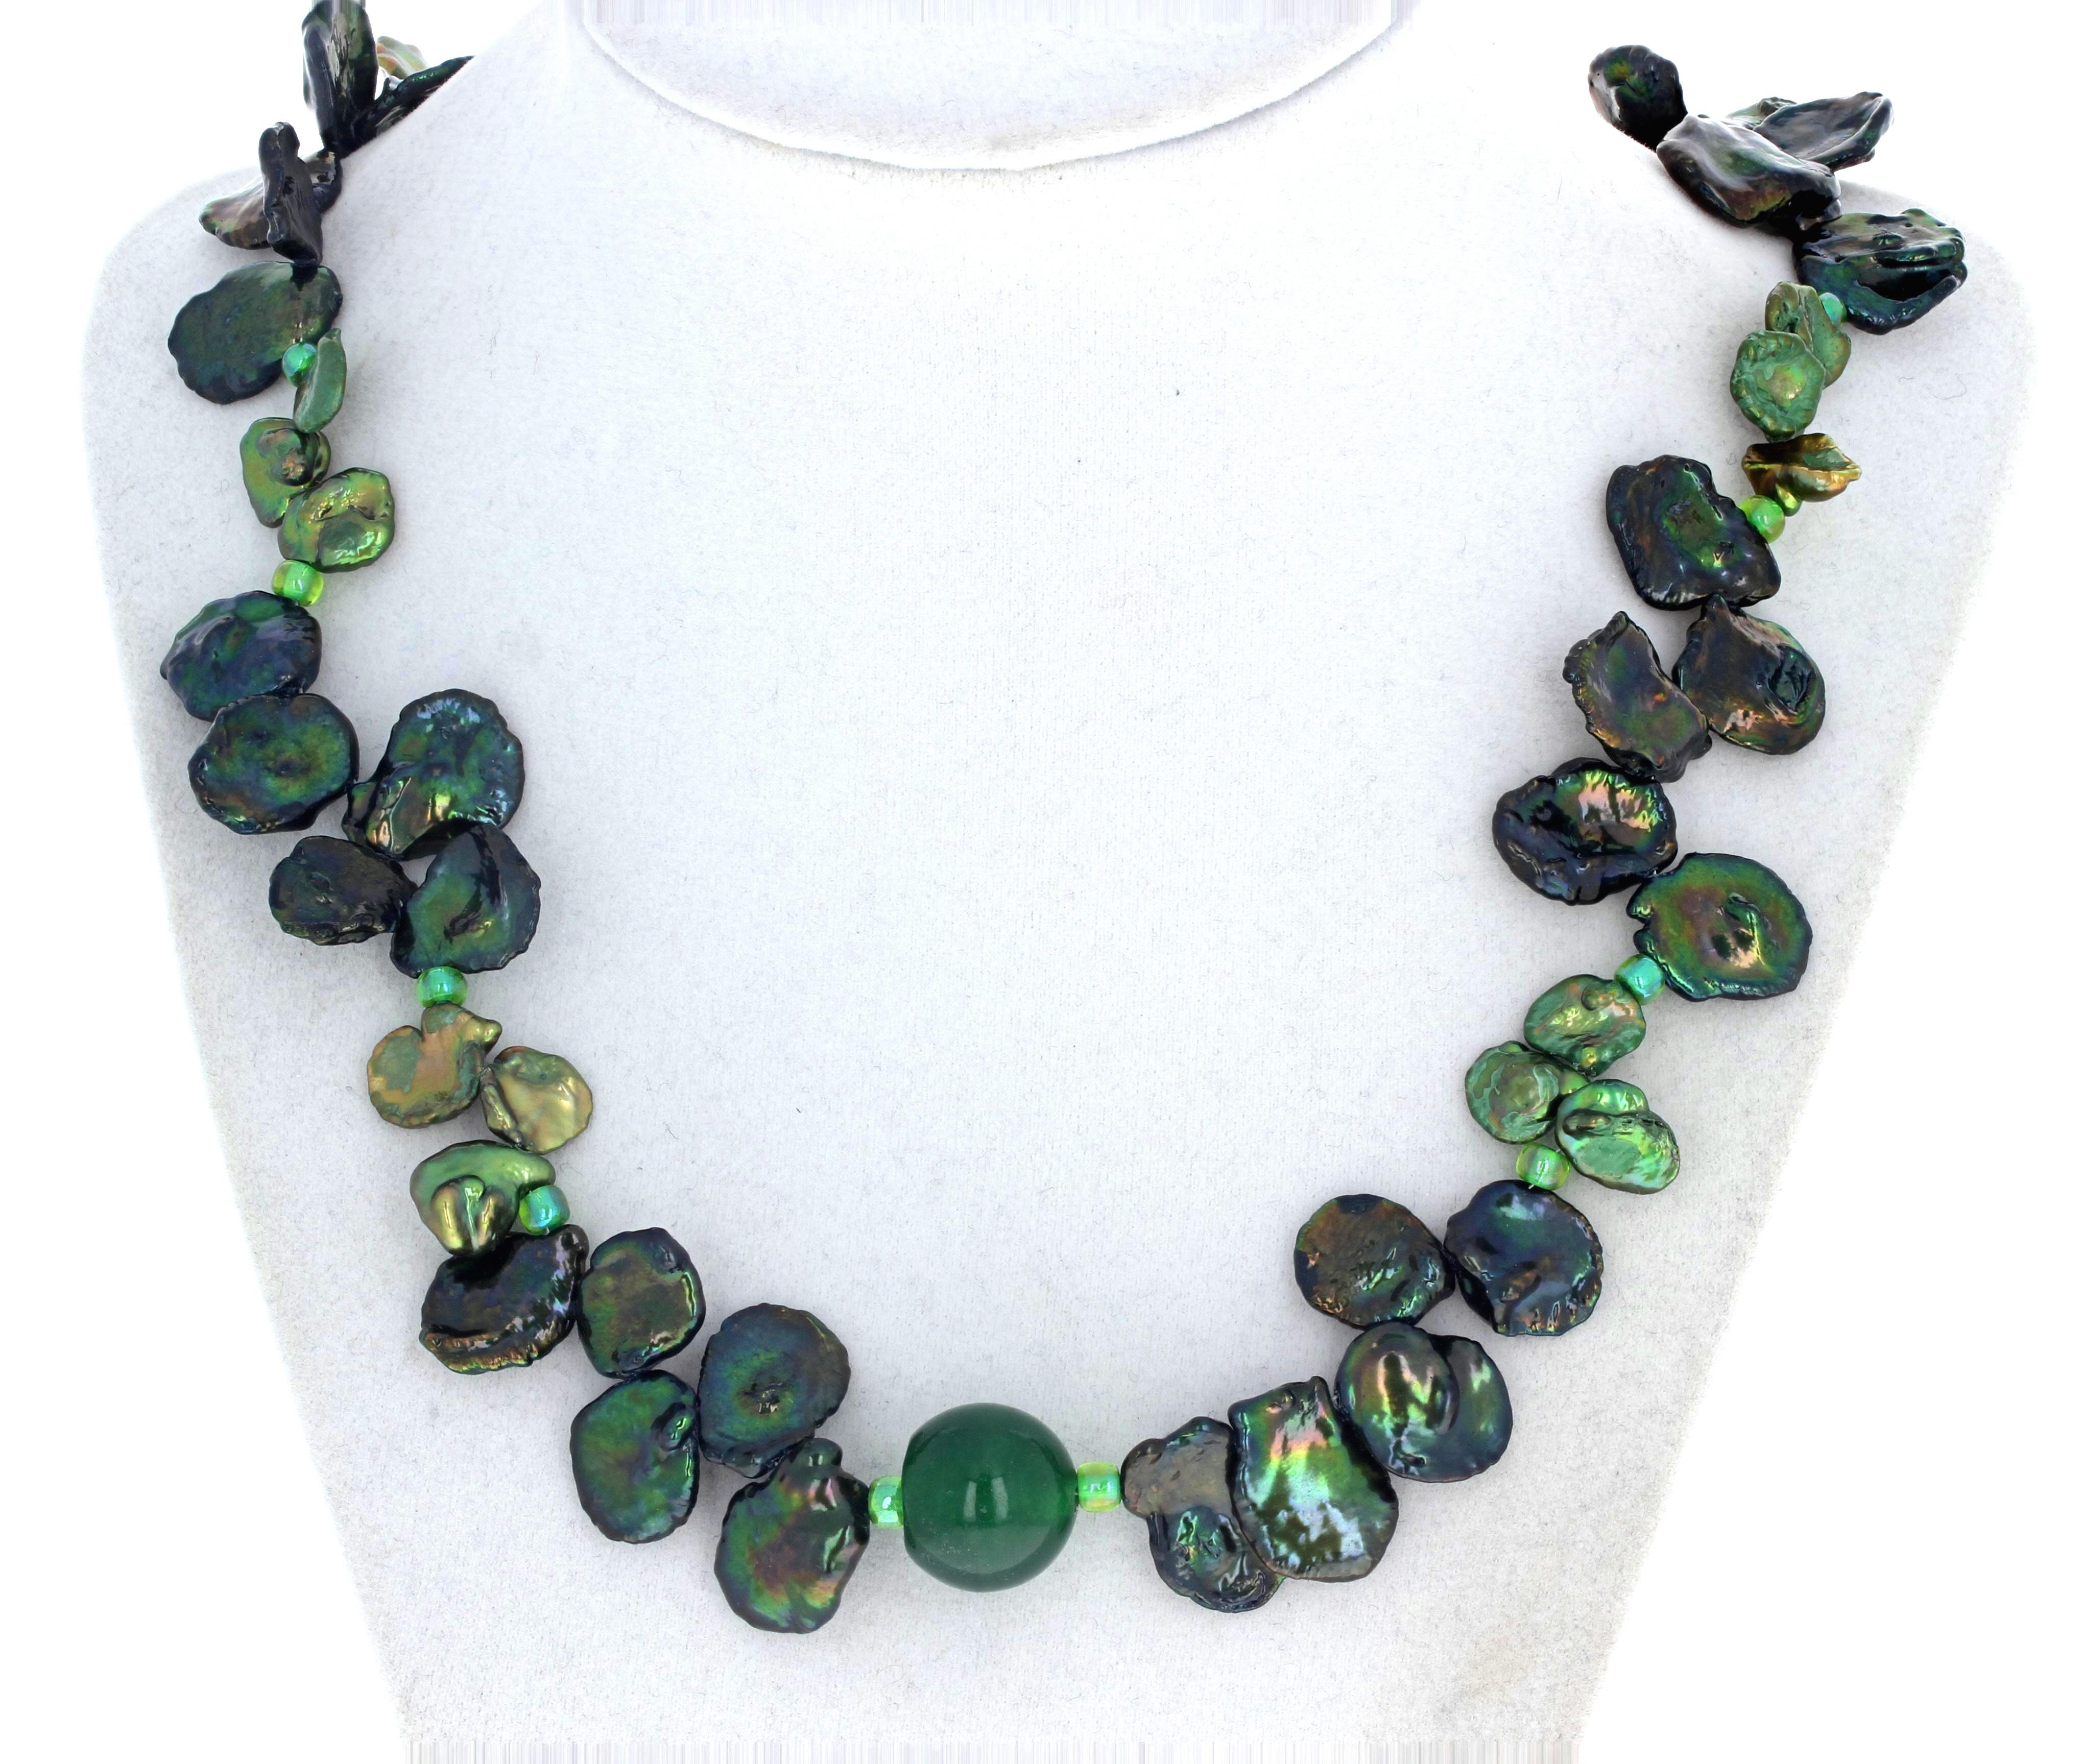 These beautifully glistening real peacock green Keshi Pearls - the largest approximately 15mm x 18mm - are enhanced with a 16mm almost round natural real green polished Jade.  This necklace is 19 1/2 inches long and the clasp is an easy to use